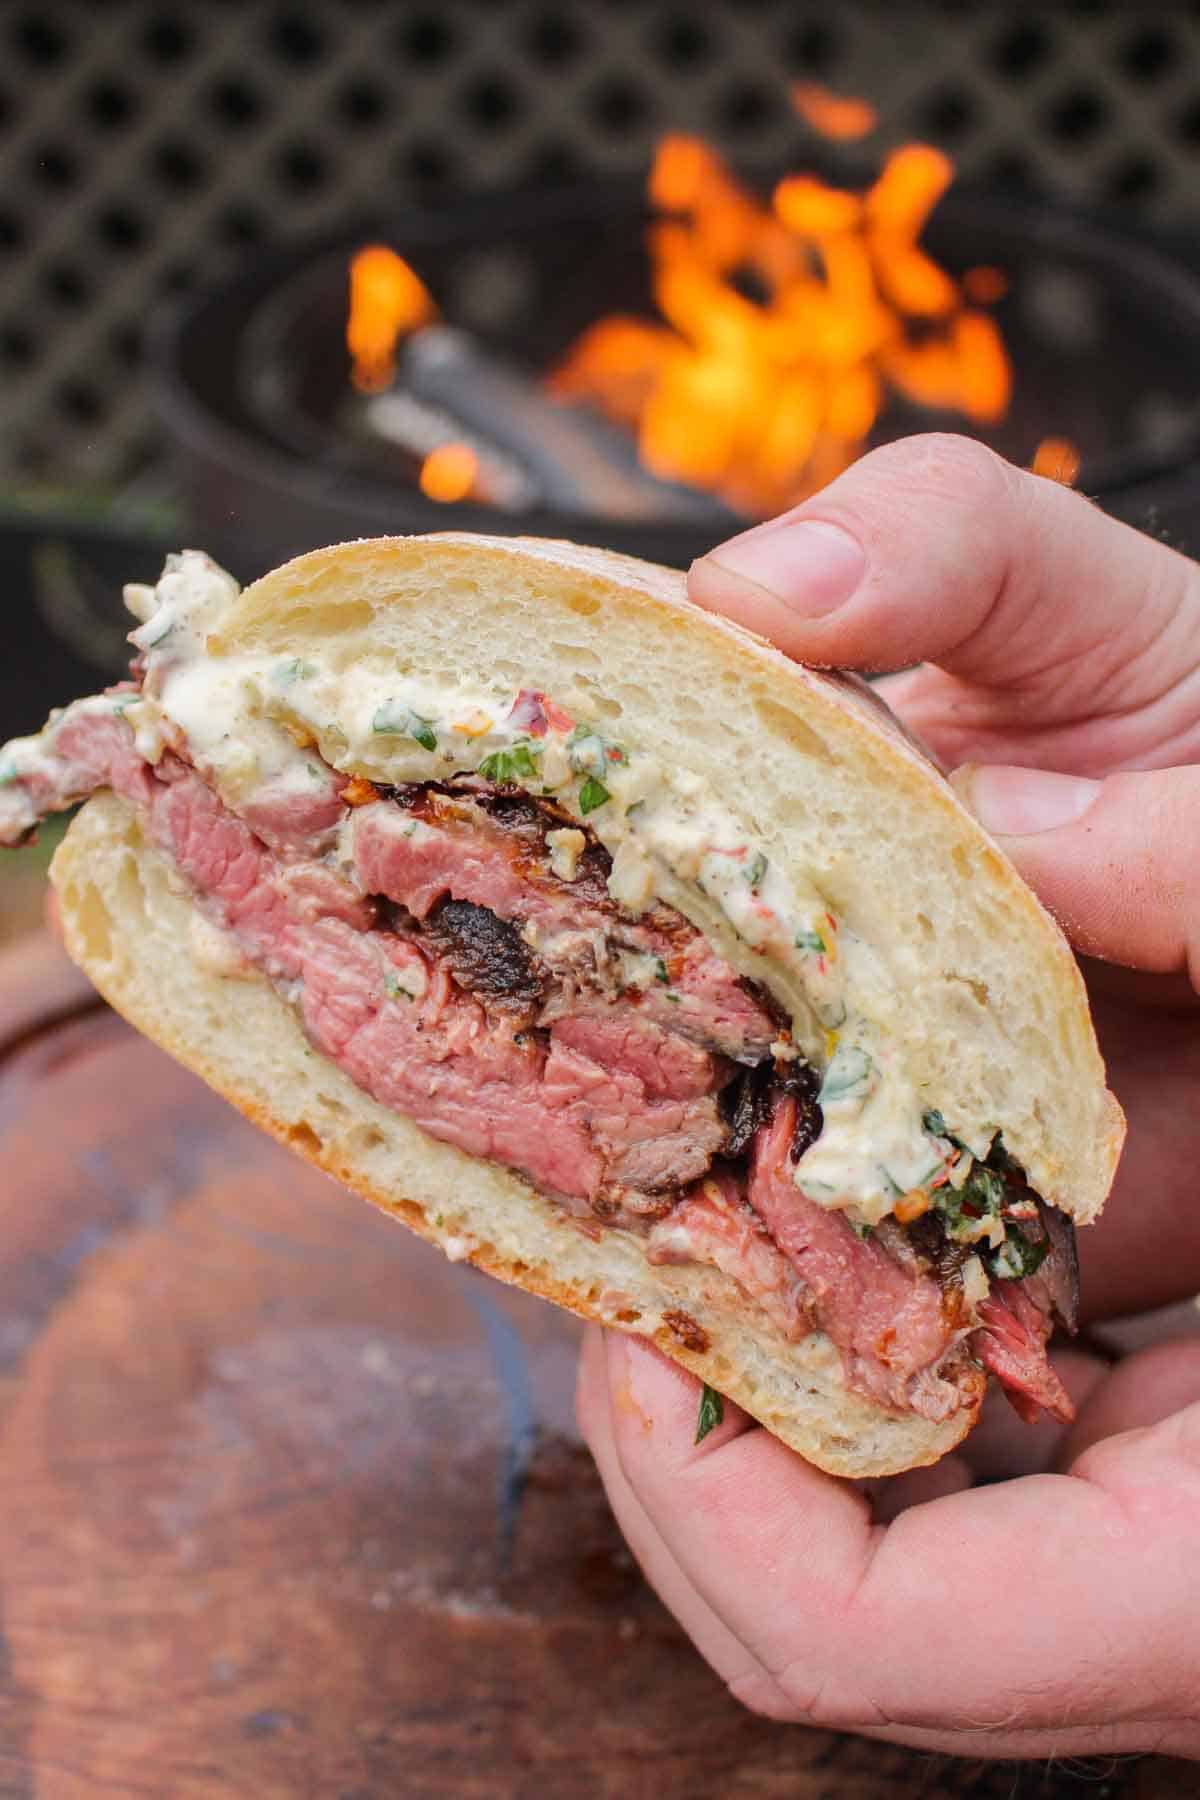 Chimichurrie Steak Sandwich being held close to the camera to show the assembly of the sandwich.